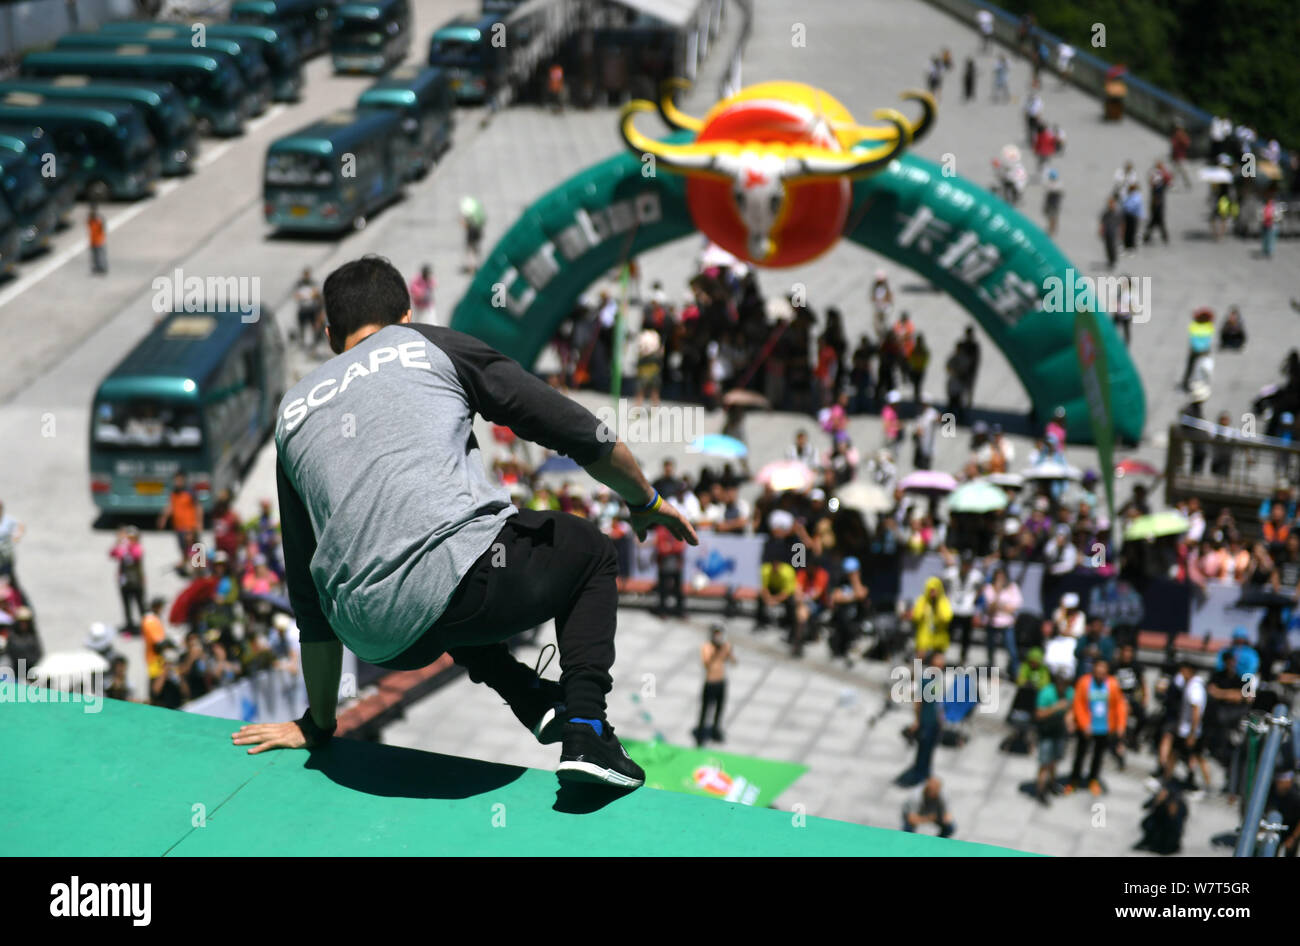 A free running athlete shows his parkour skills during the Skyladder International Freerunning Championship on the Tianmen Mountain (or Tianmenshan Mo Stock Photo